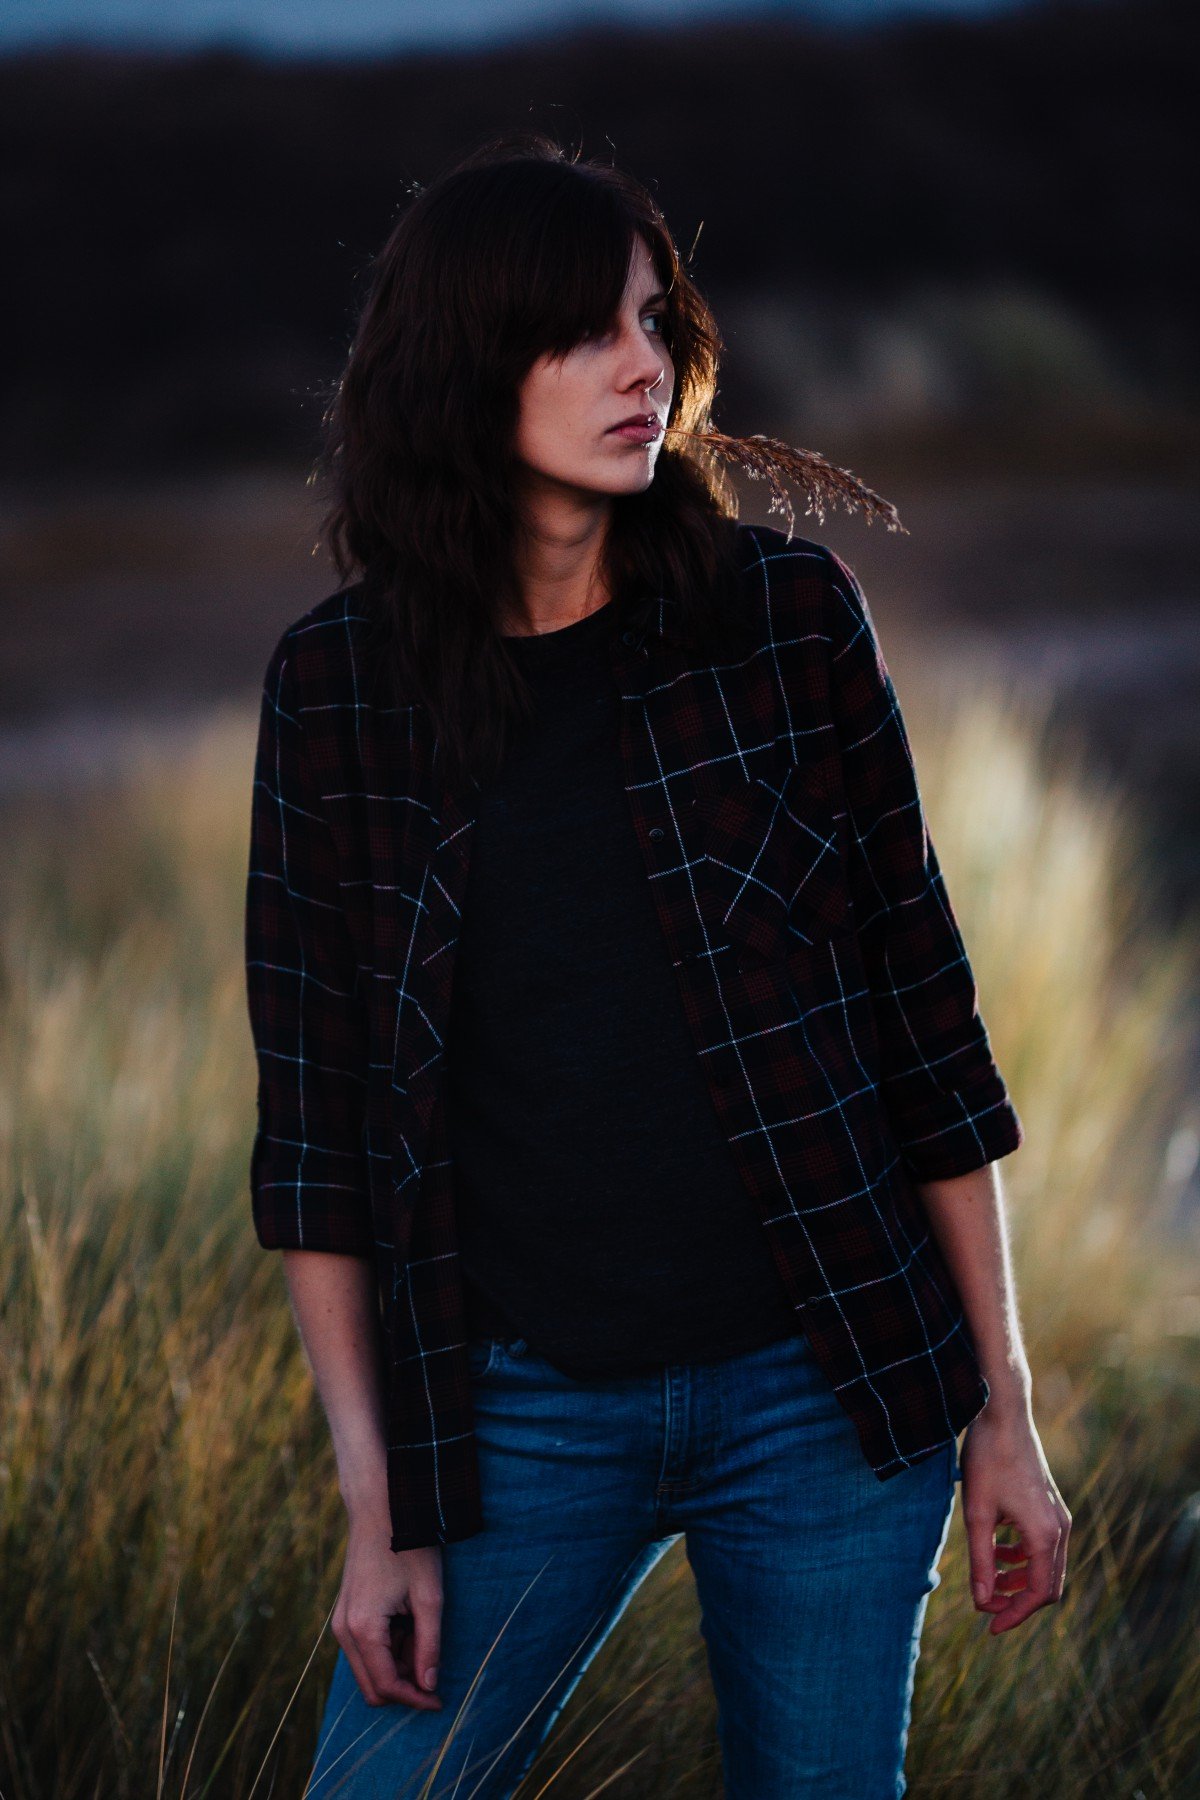 A woman in jeans and a checked shirt standing in a field, captured through the lens of a Sigma art 85 mm 1.4.